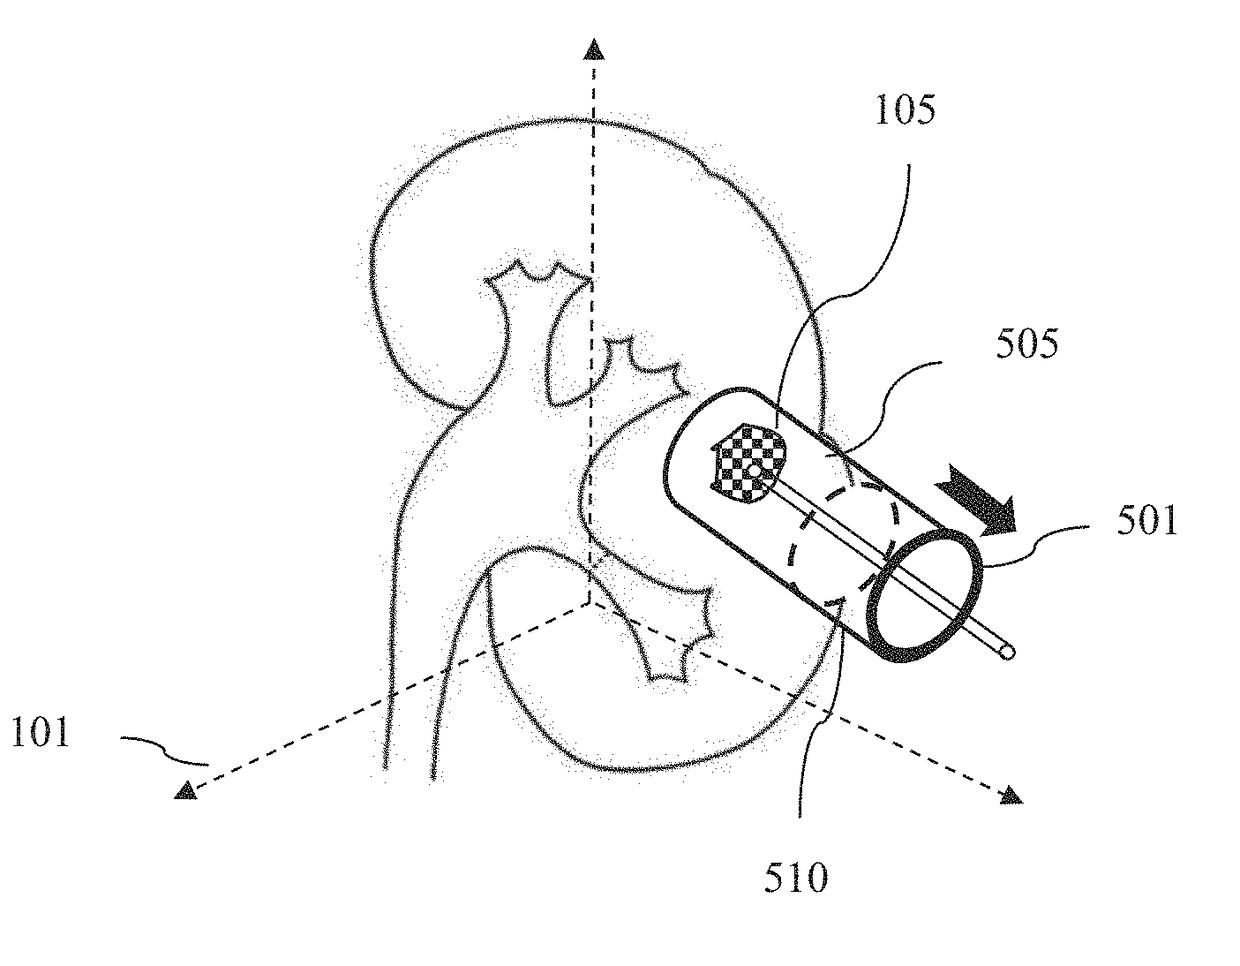 Method and system for interactive grid placement and measurements for lesion removal